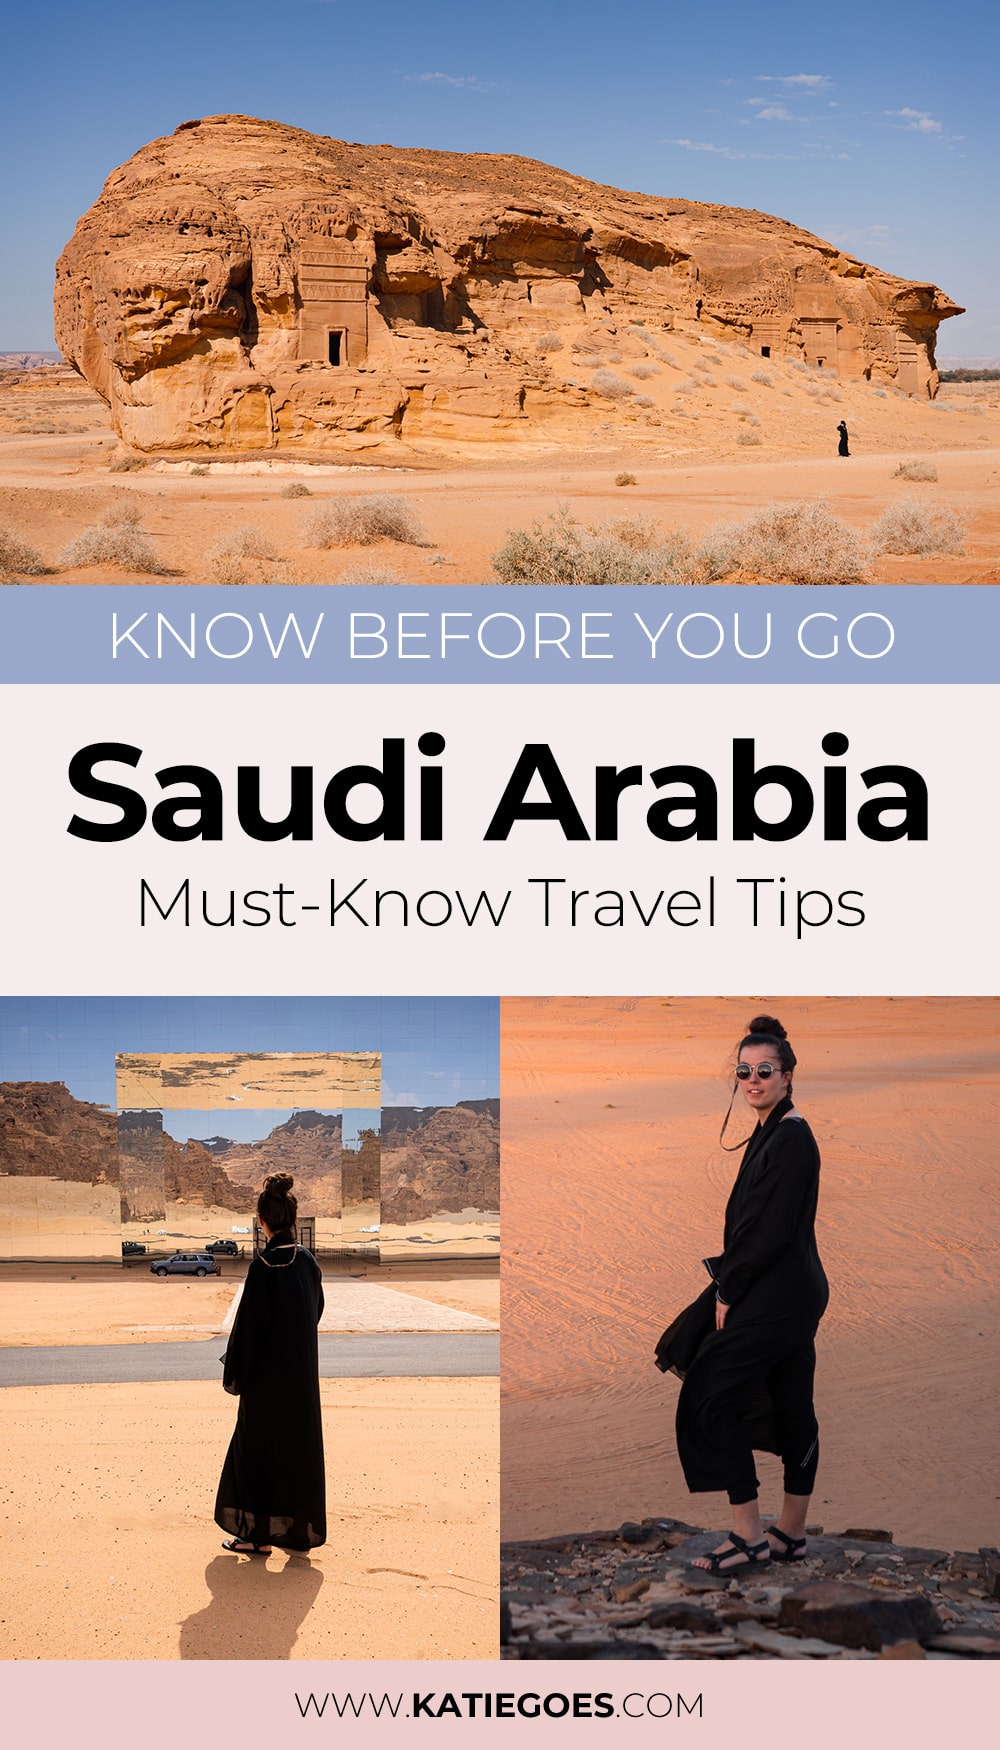 Know Before You Go: Saudi Arabia Must-Know Travel Tips